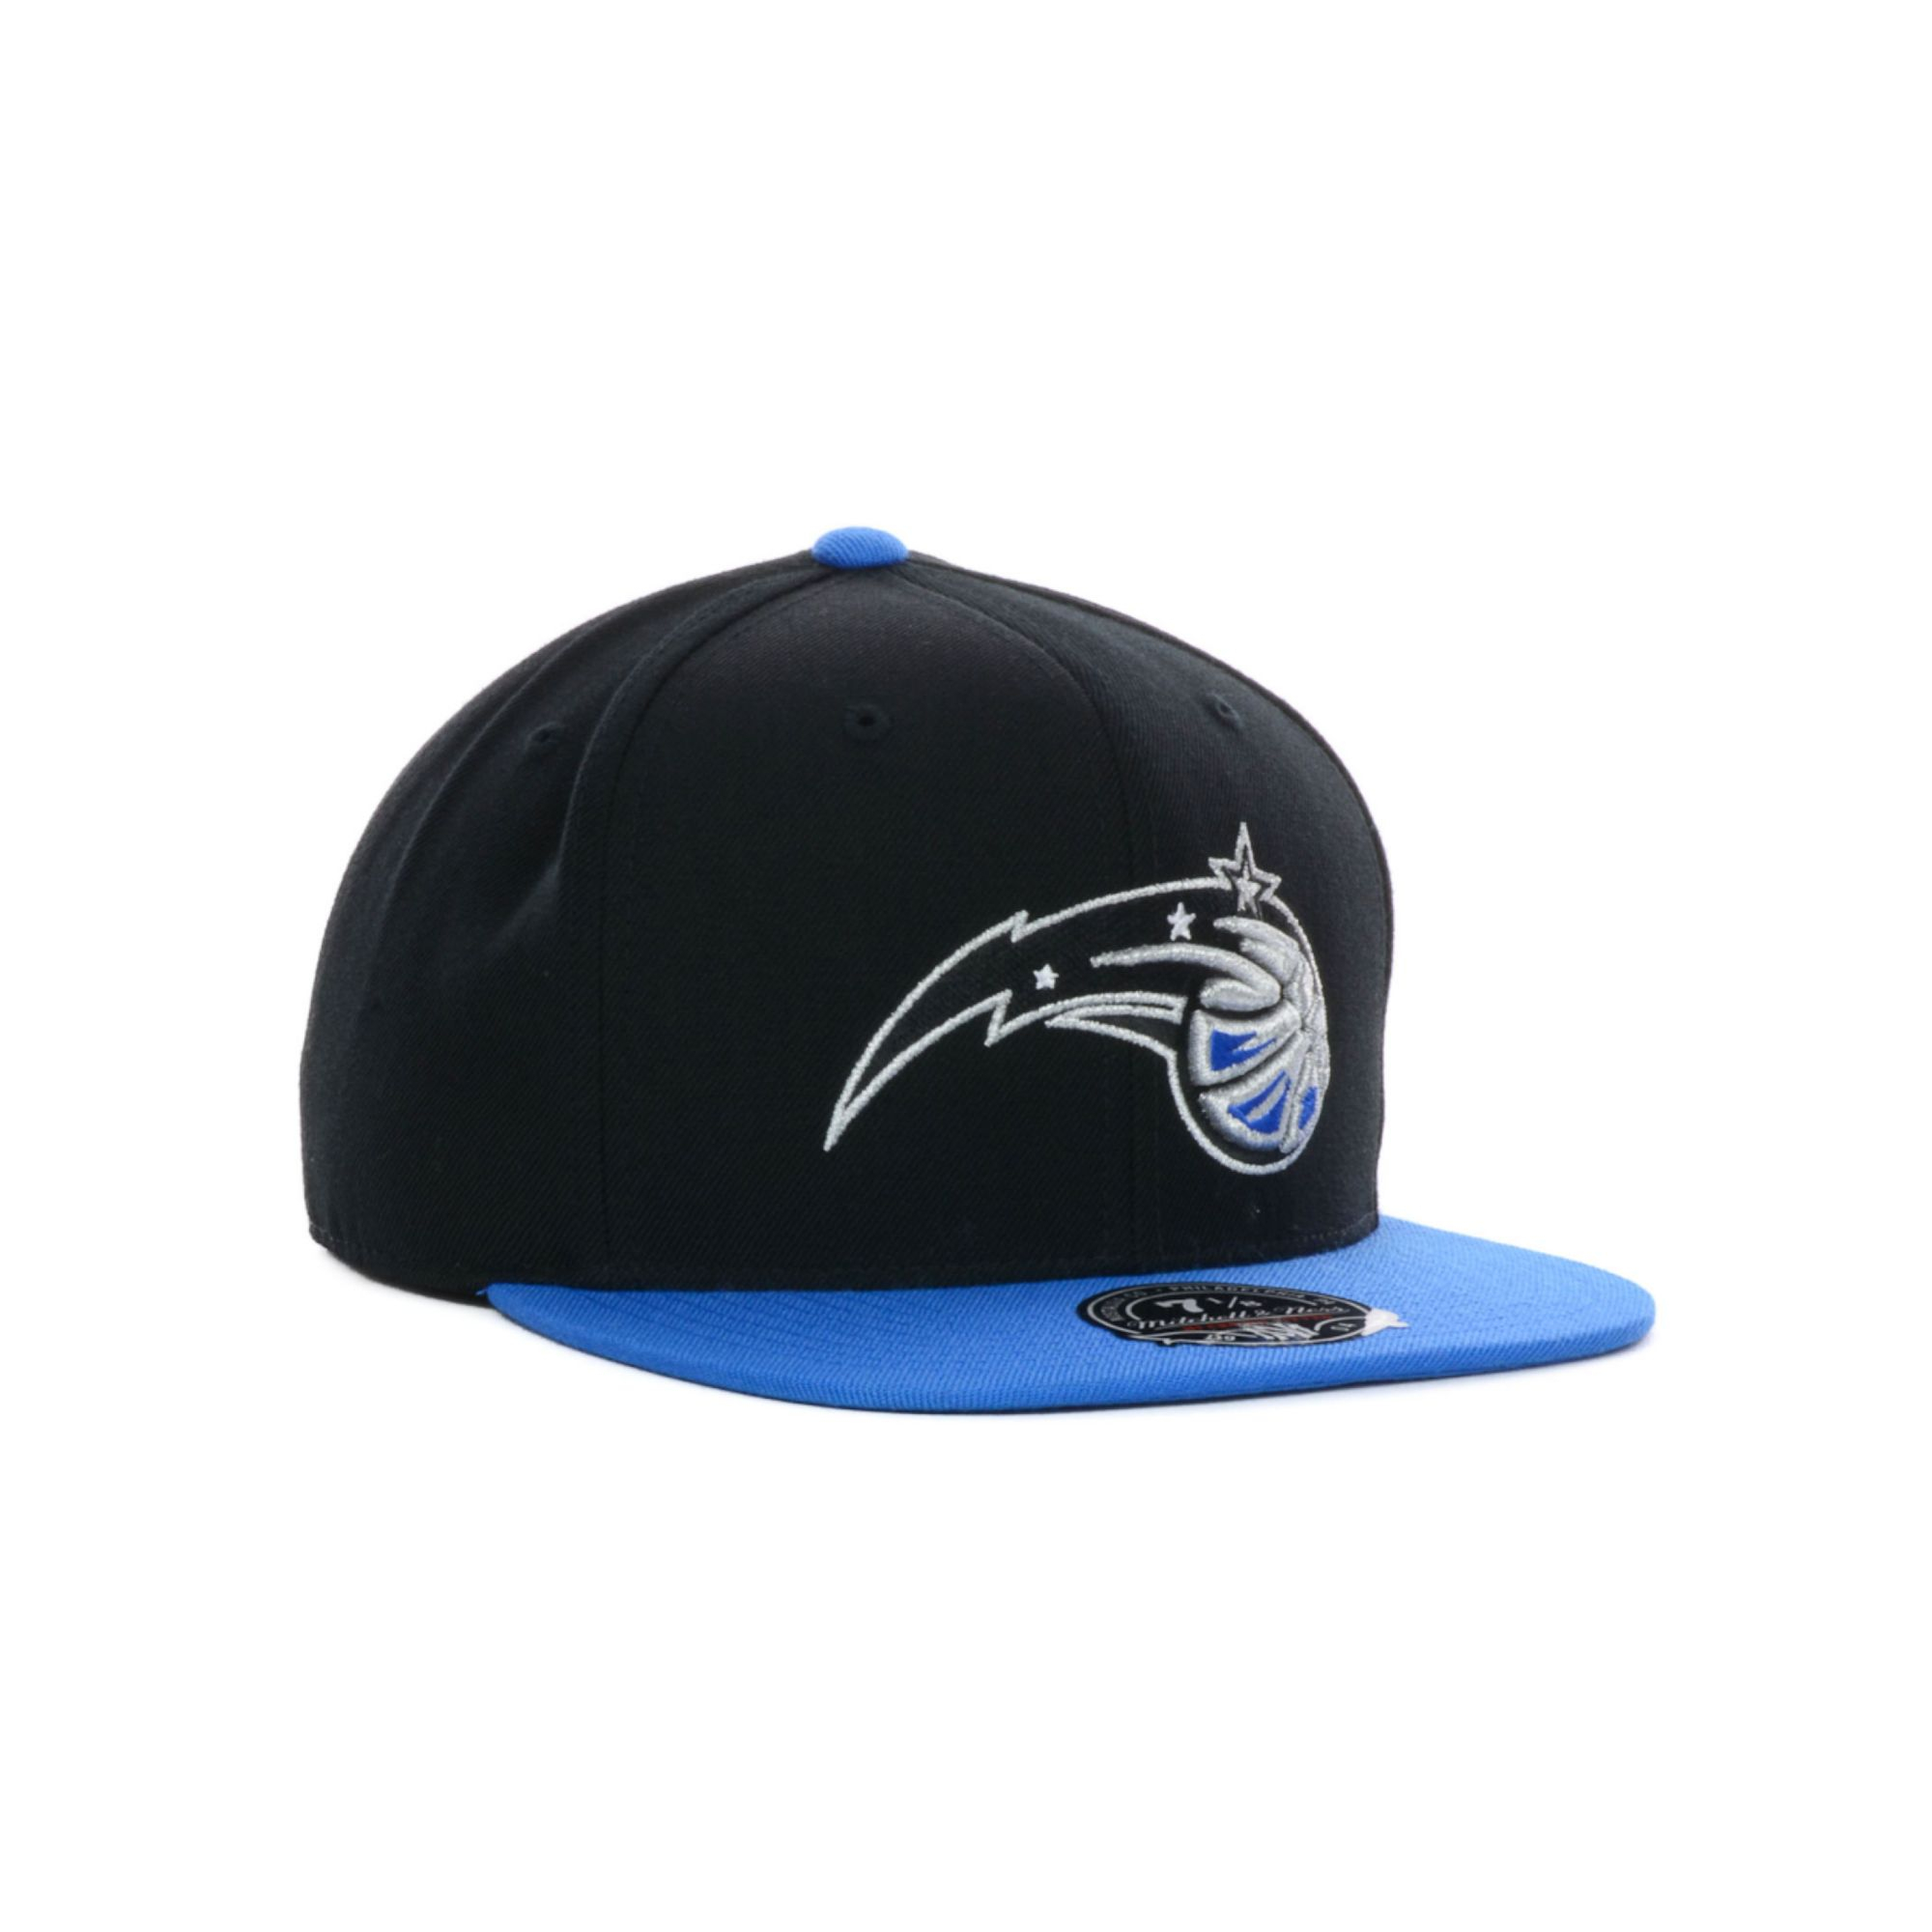 Nike Mitchell Ness Orlando Magic Nba Black 2 Tone Fitted Cap in Blue